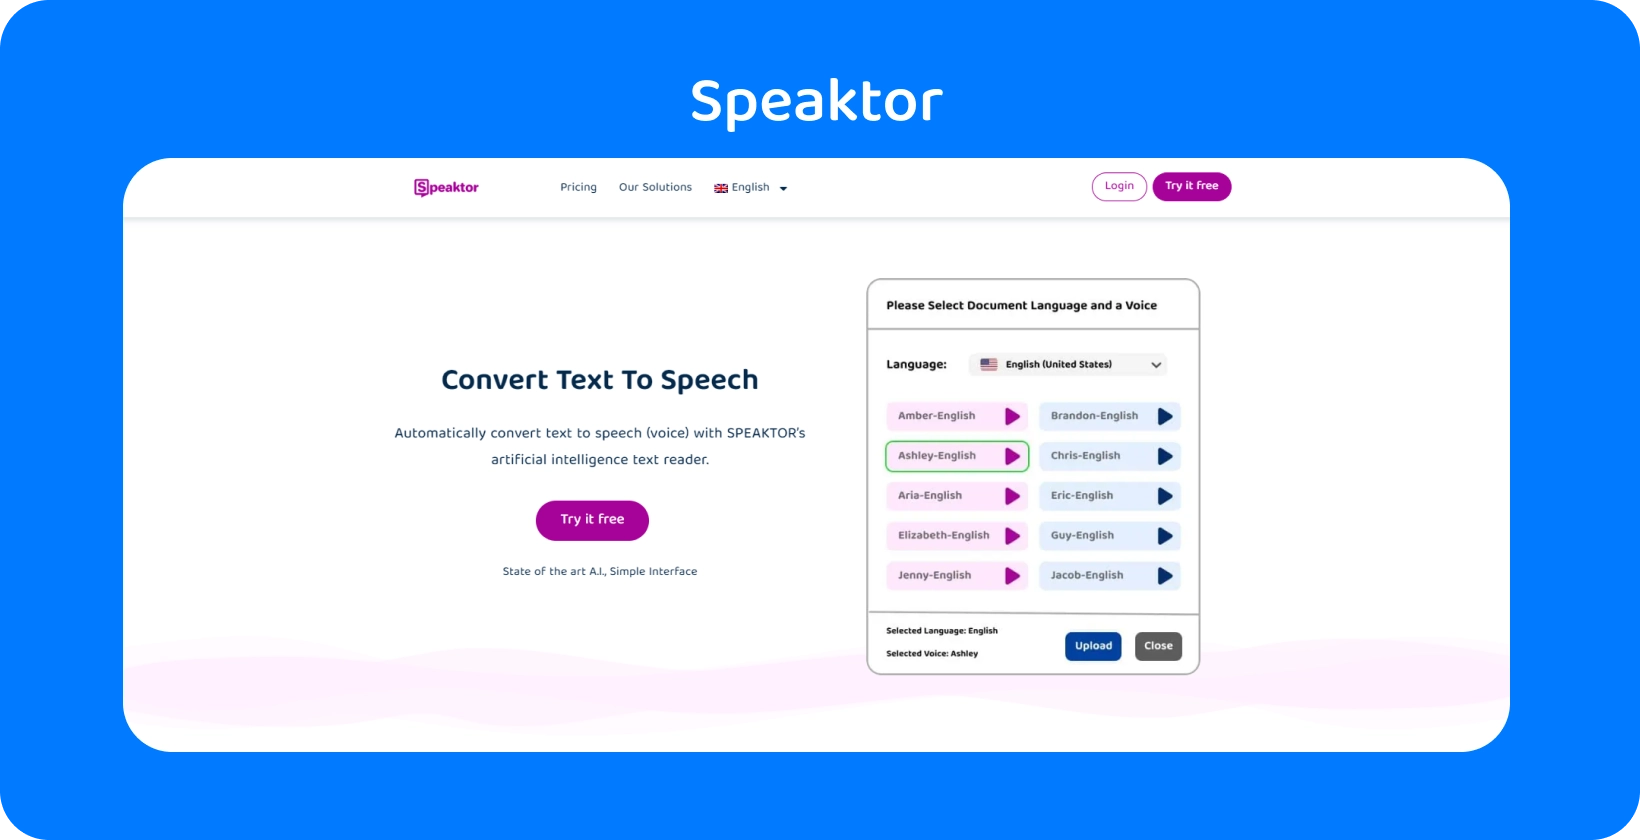 Speaktor offers an easy-to-use interface for text-to-speech conversion.